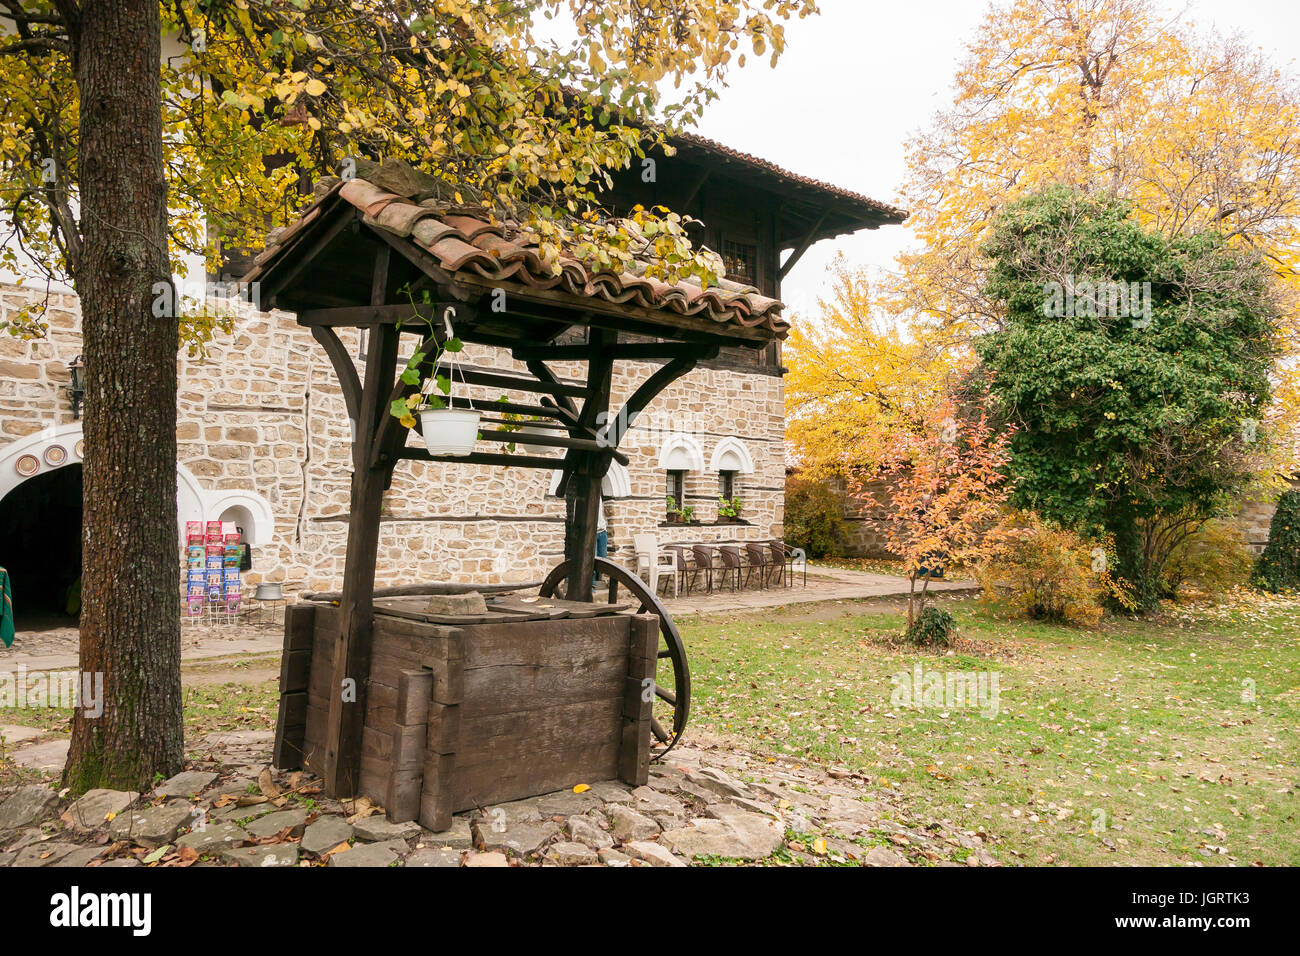 Water well with tiled roof in the garden a typical old house in Svishtov, Bulgaria Stock Photo